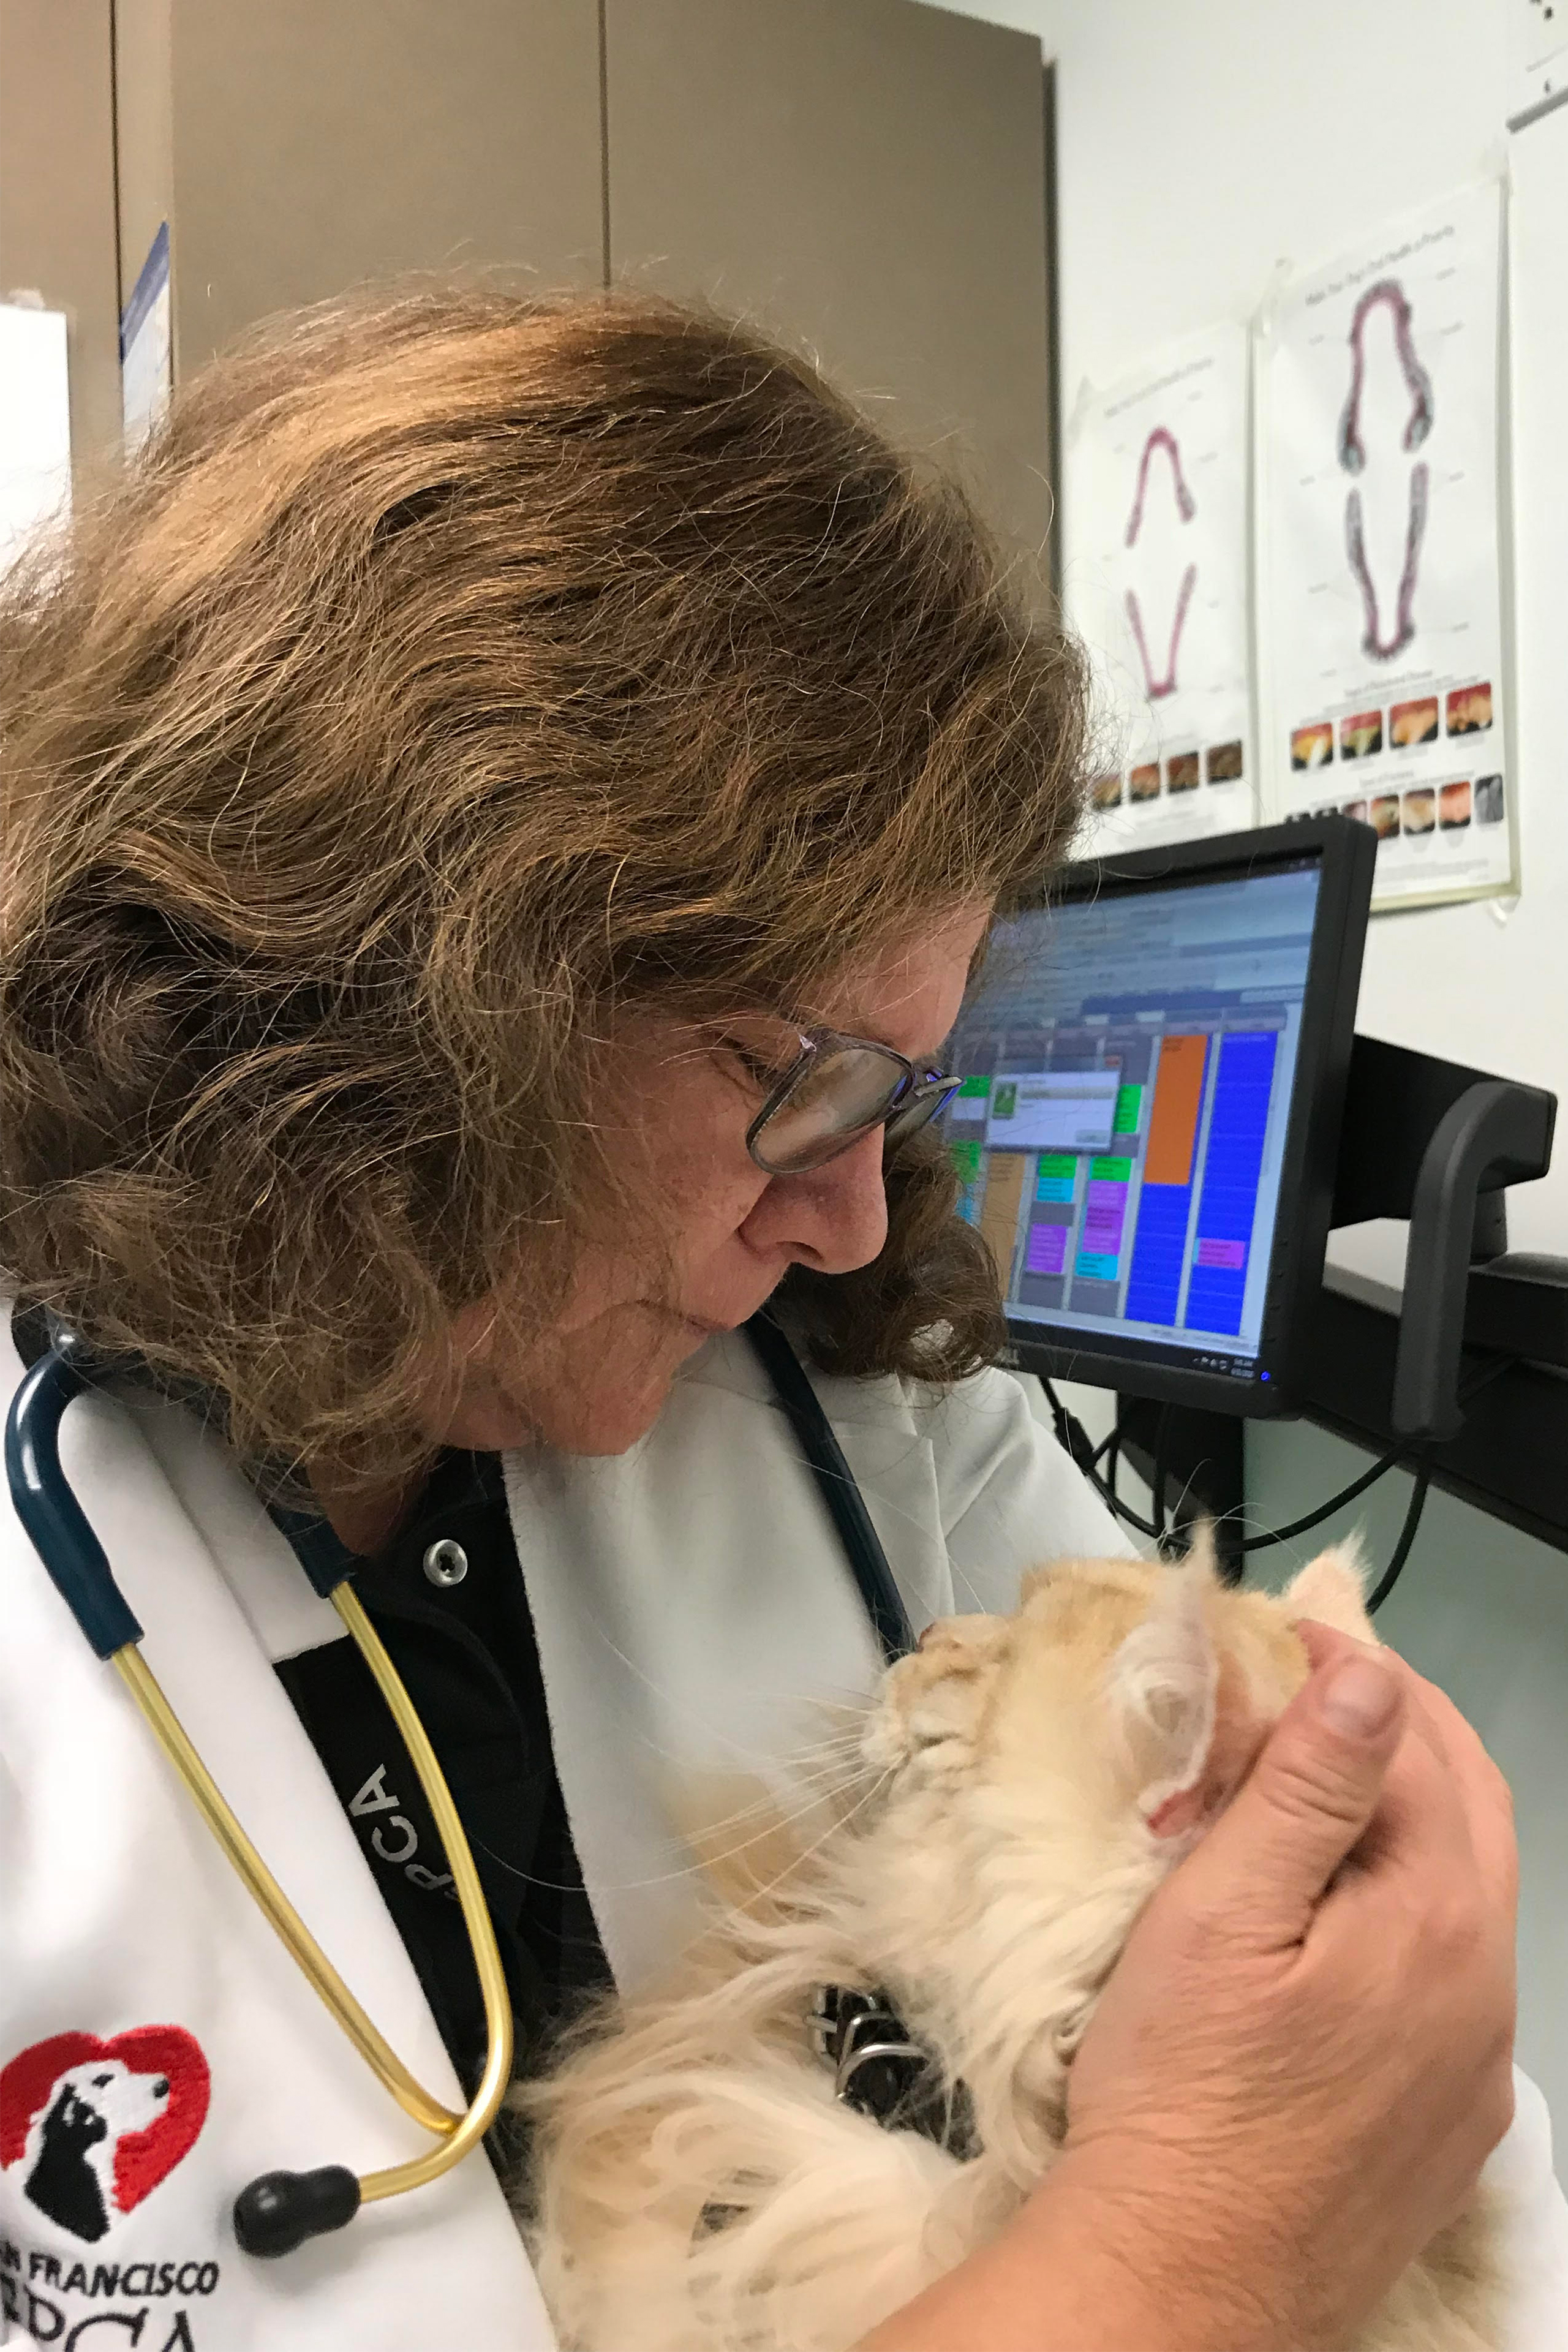 Kathy Gervais is seen wearing a lab coat and a stethoscope around her neck. She is holding a cat in her arms.